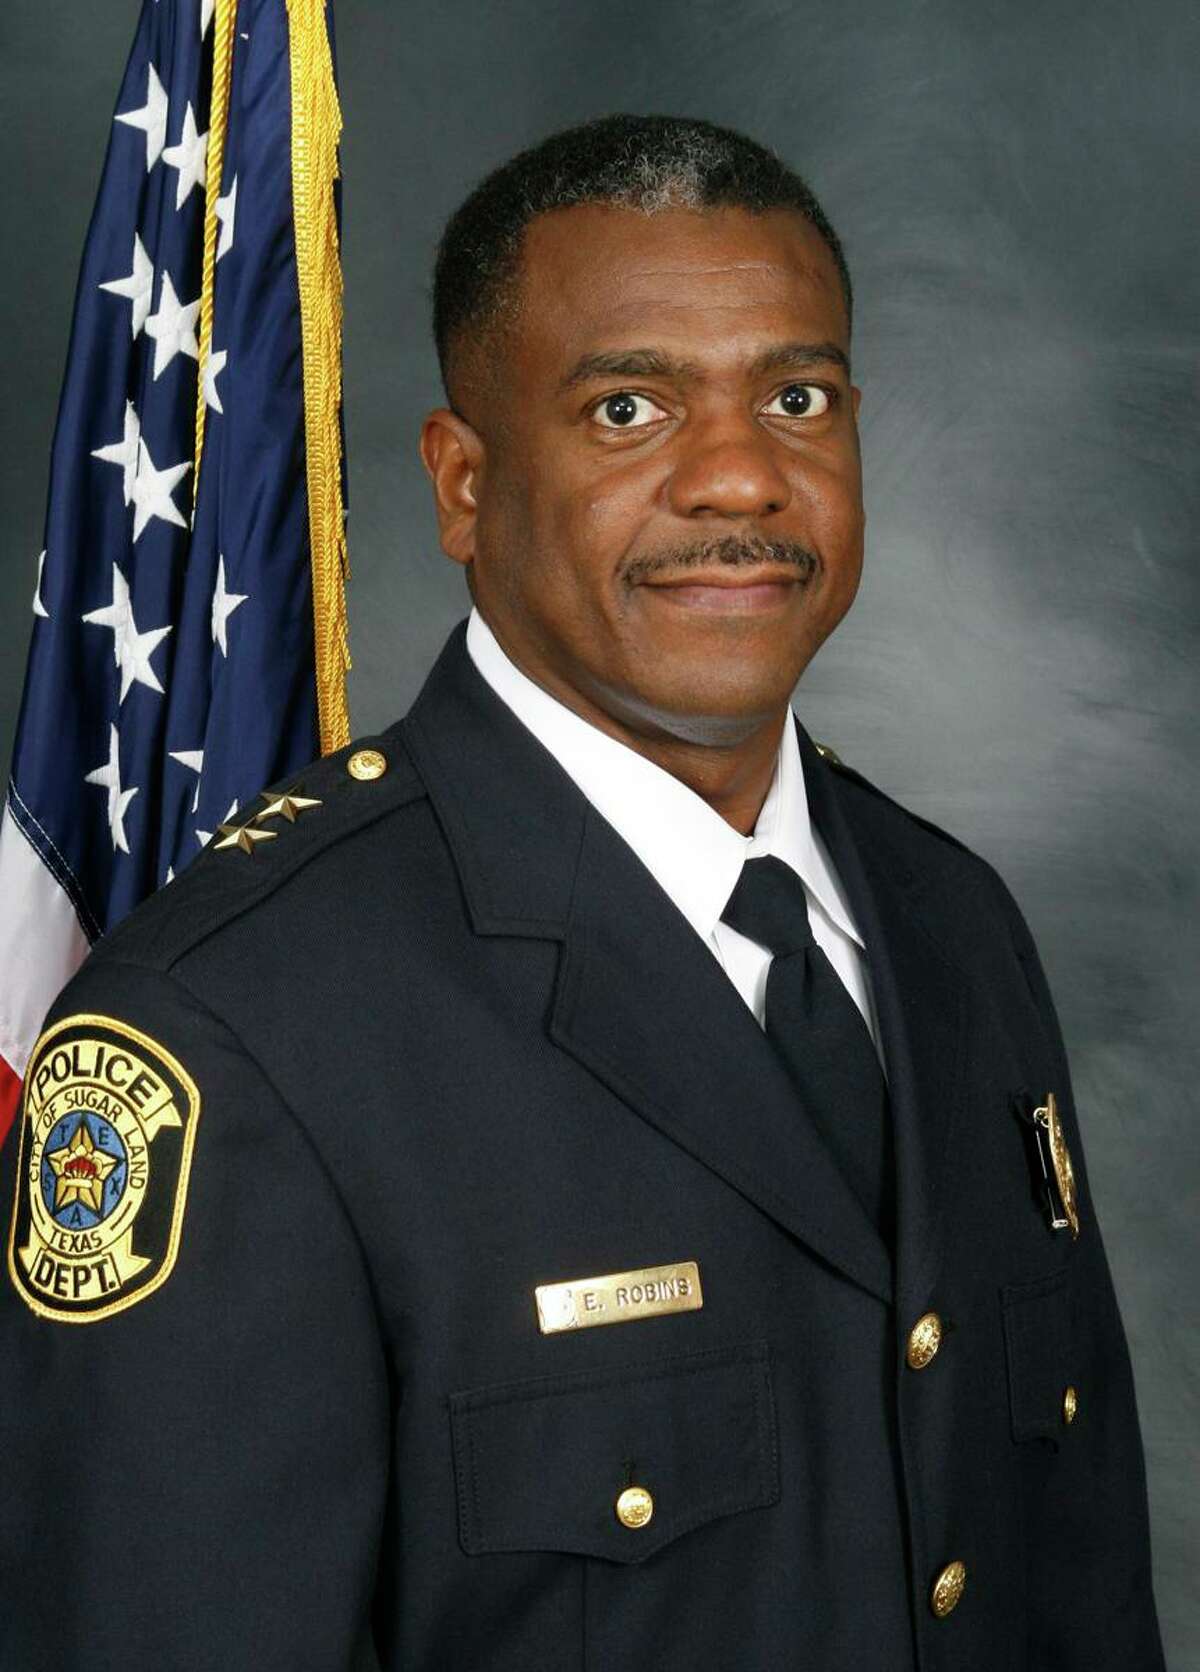 Sugar Land Police Chief Eric Robins plans to retire on June 1, after 33 years of public service.